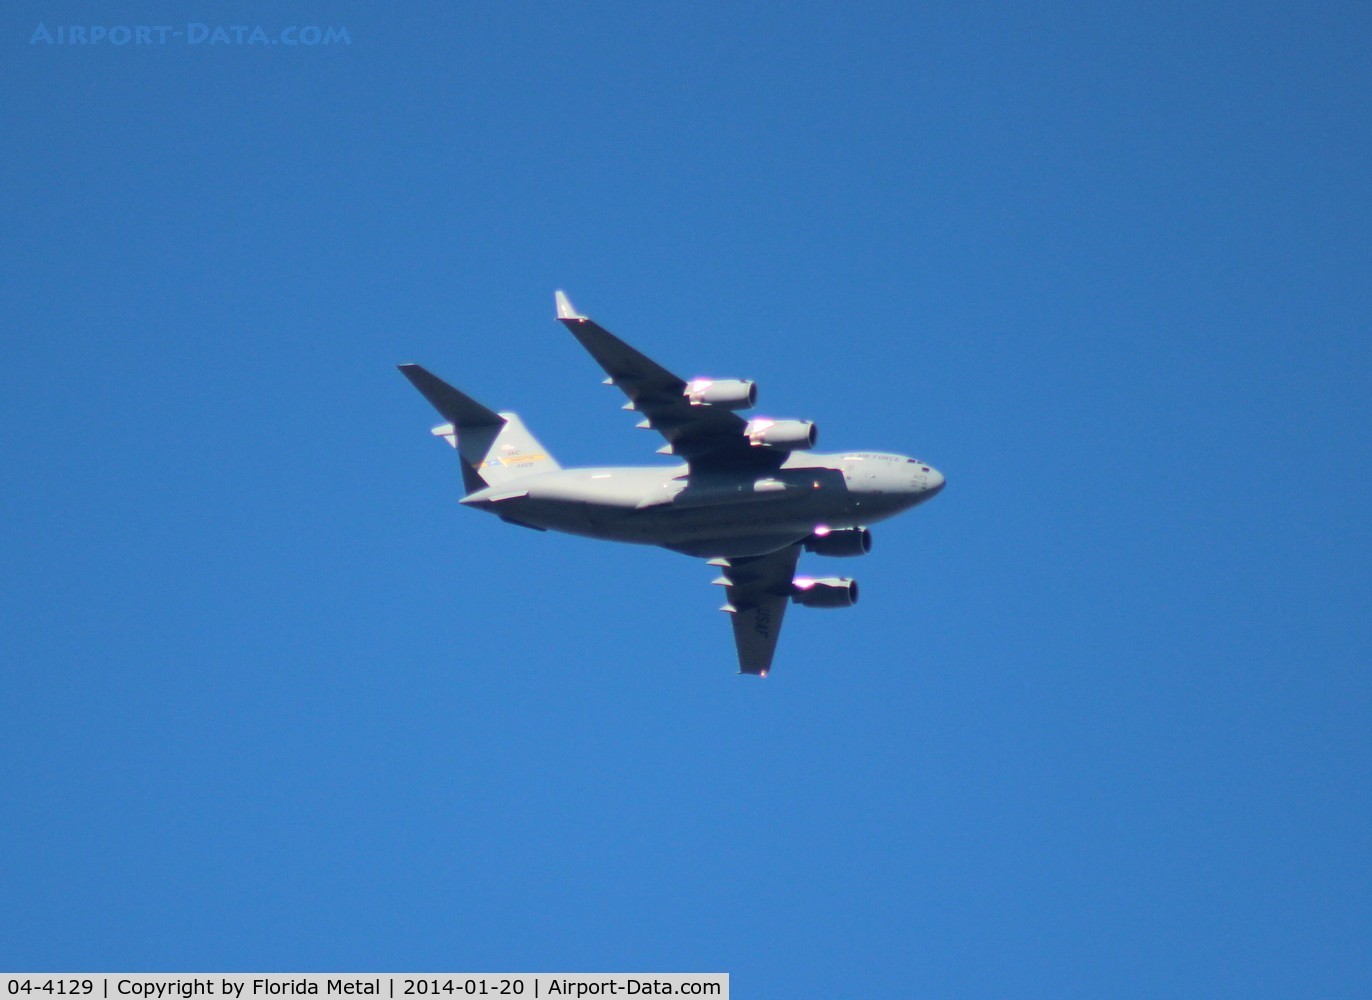 04-4129, 2004 Boeing C-17A Globemaster III C/N P-129, C-17A flying over Viera wetlands on its way to Patrick AFB